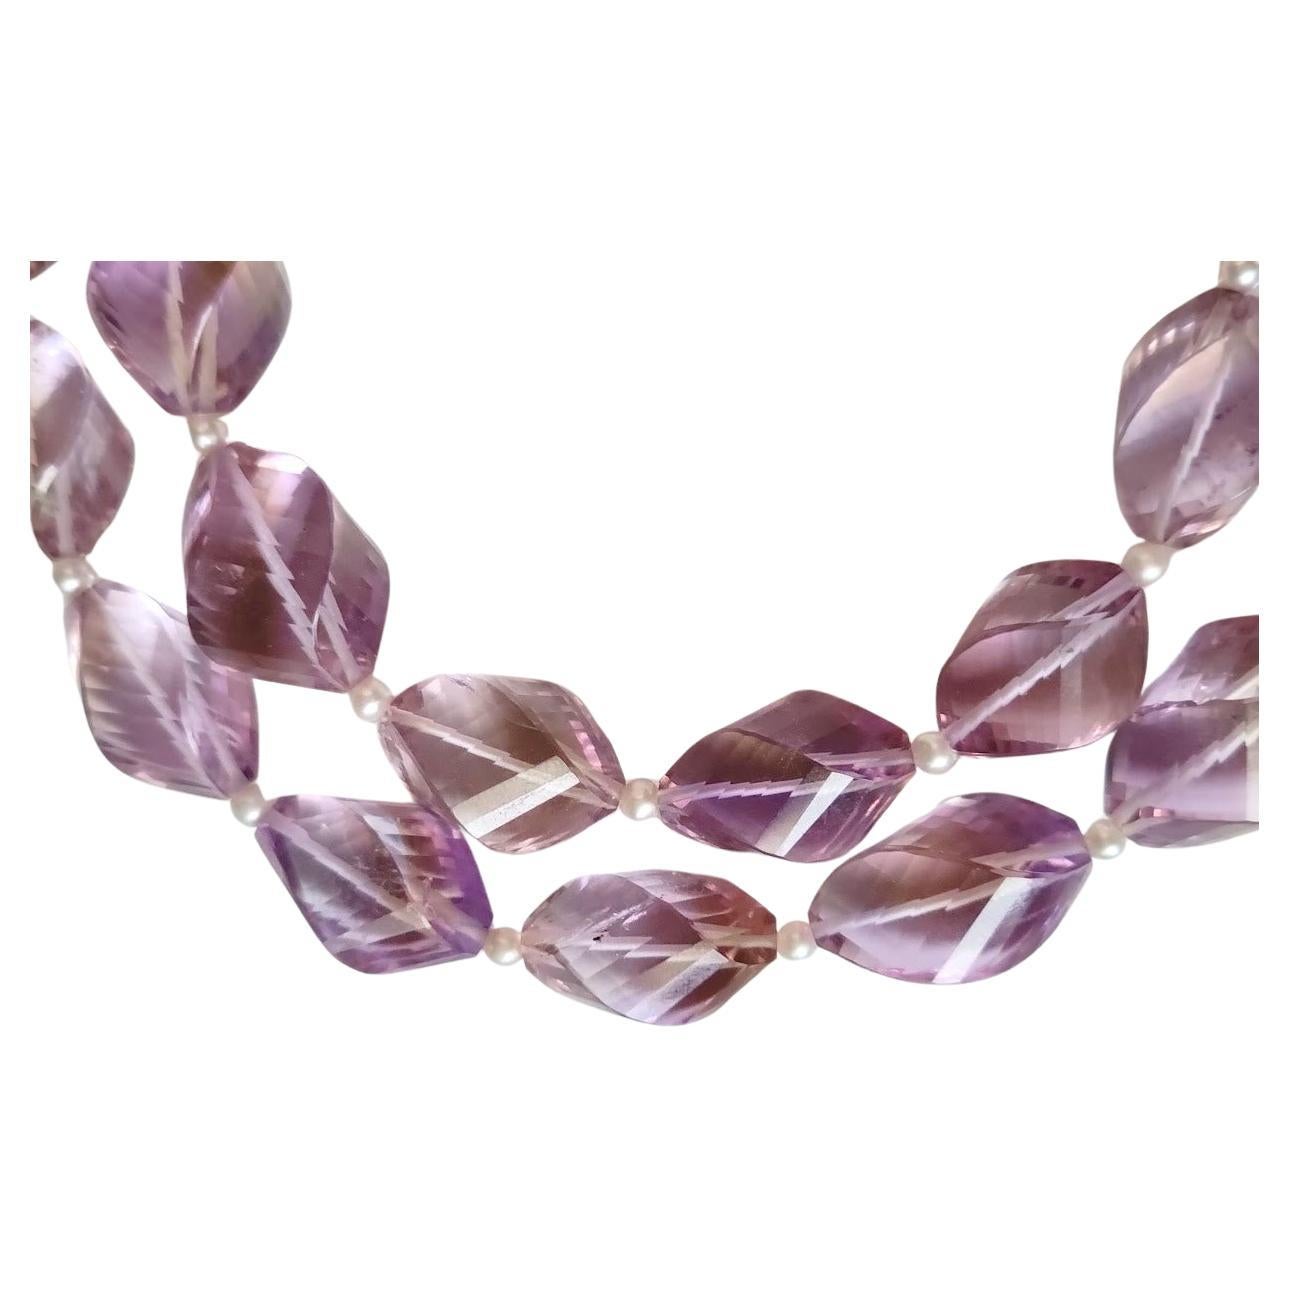 One of the rarest and most beautiful natural gemstones, Ametrine is a uniquely lovely bi-colored combination of Amethyst and Citrine Quartz.
Ametrine, also known as trystine or by its trade name as bolivianite, is a naturally occurring variety of